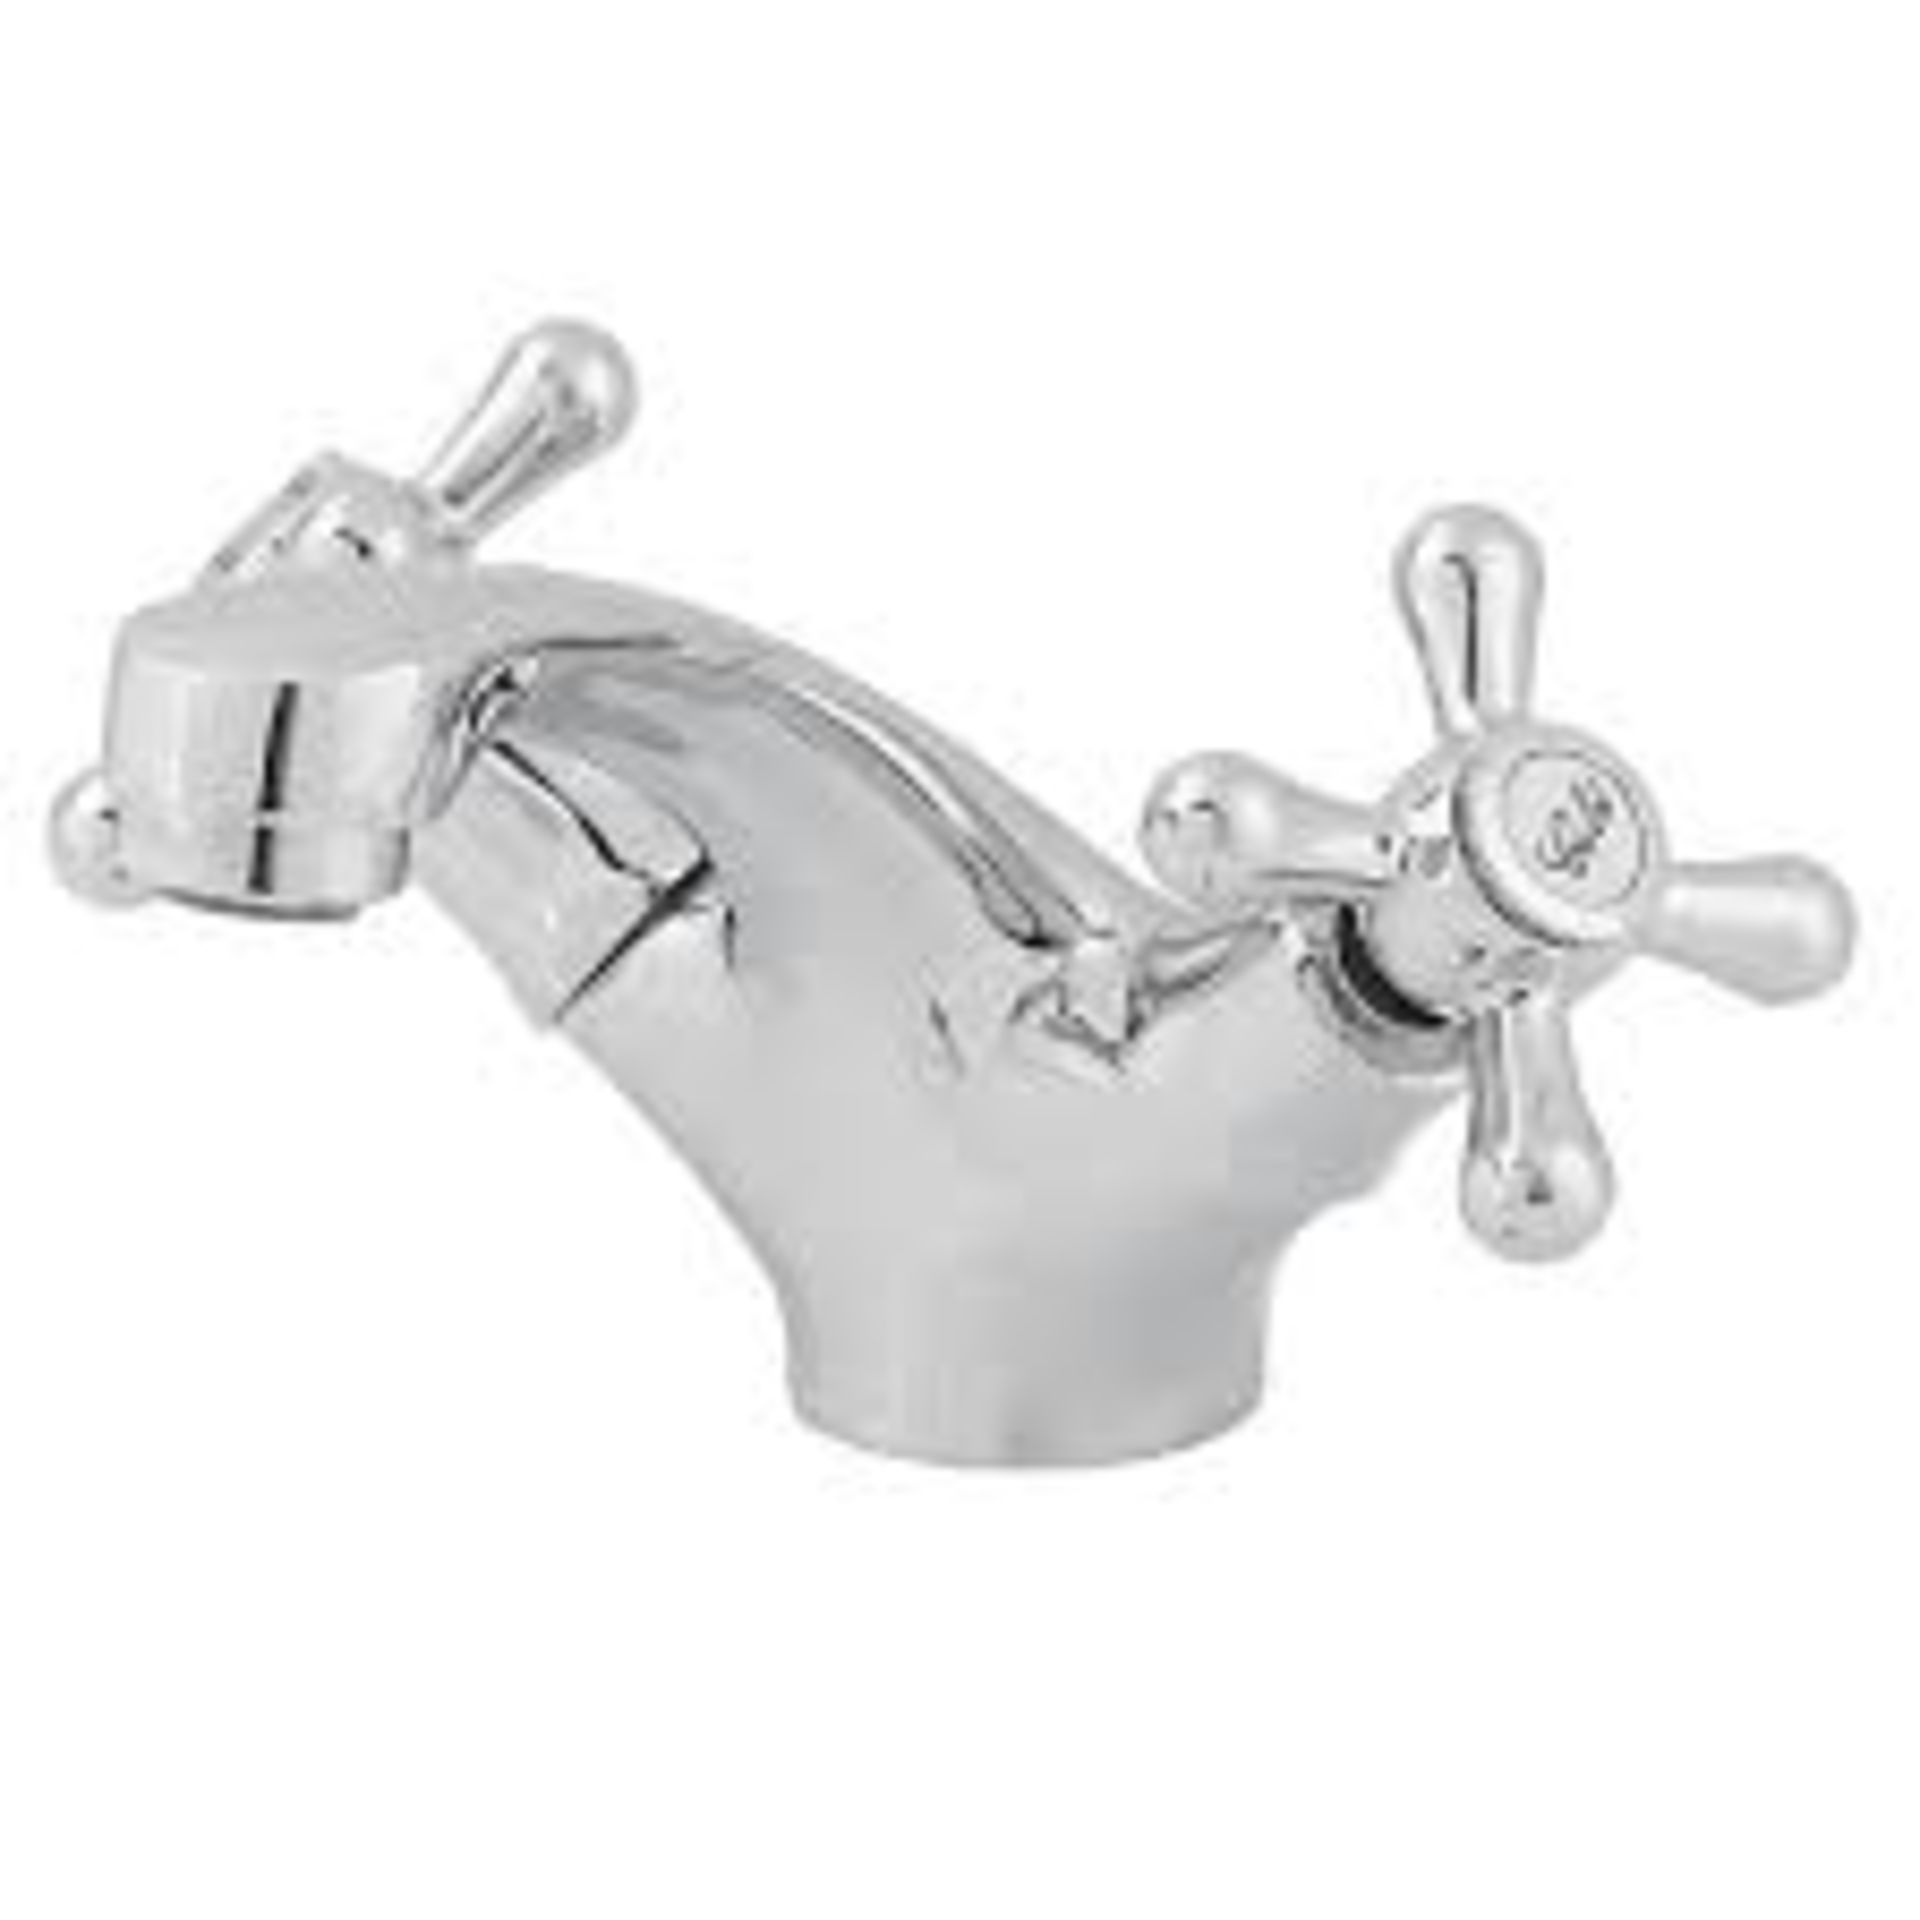 GoodHome Etel 2 lever Traditional Basin Mono mixer Tap. - S1.5.